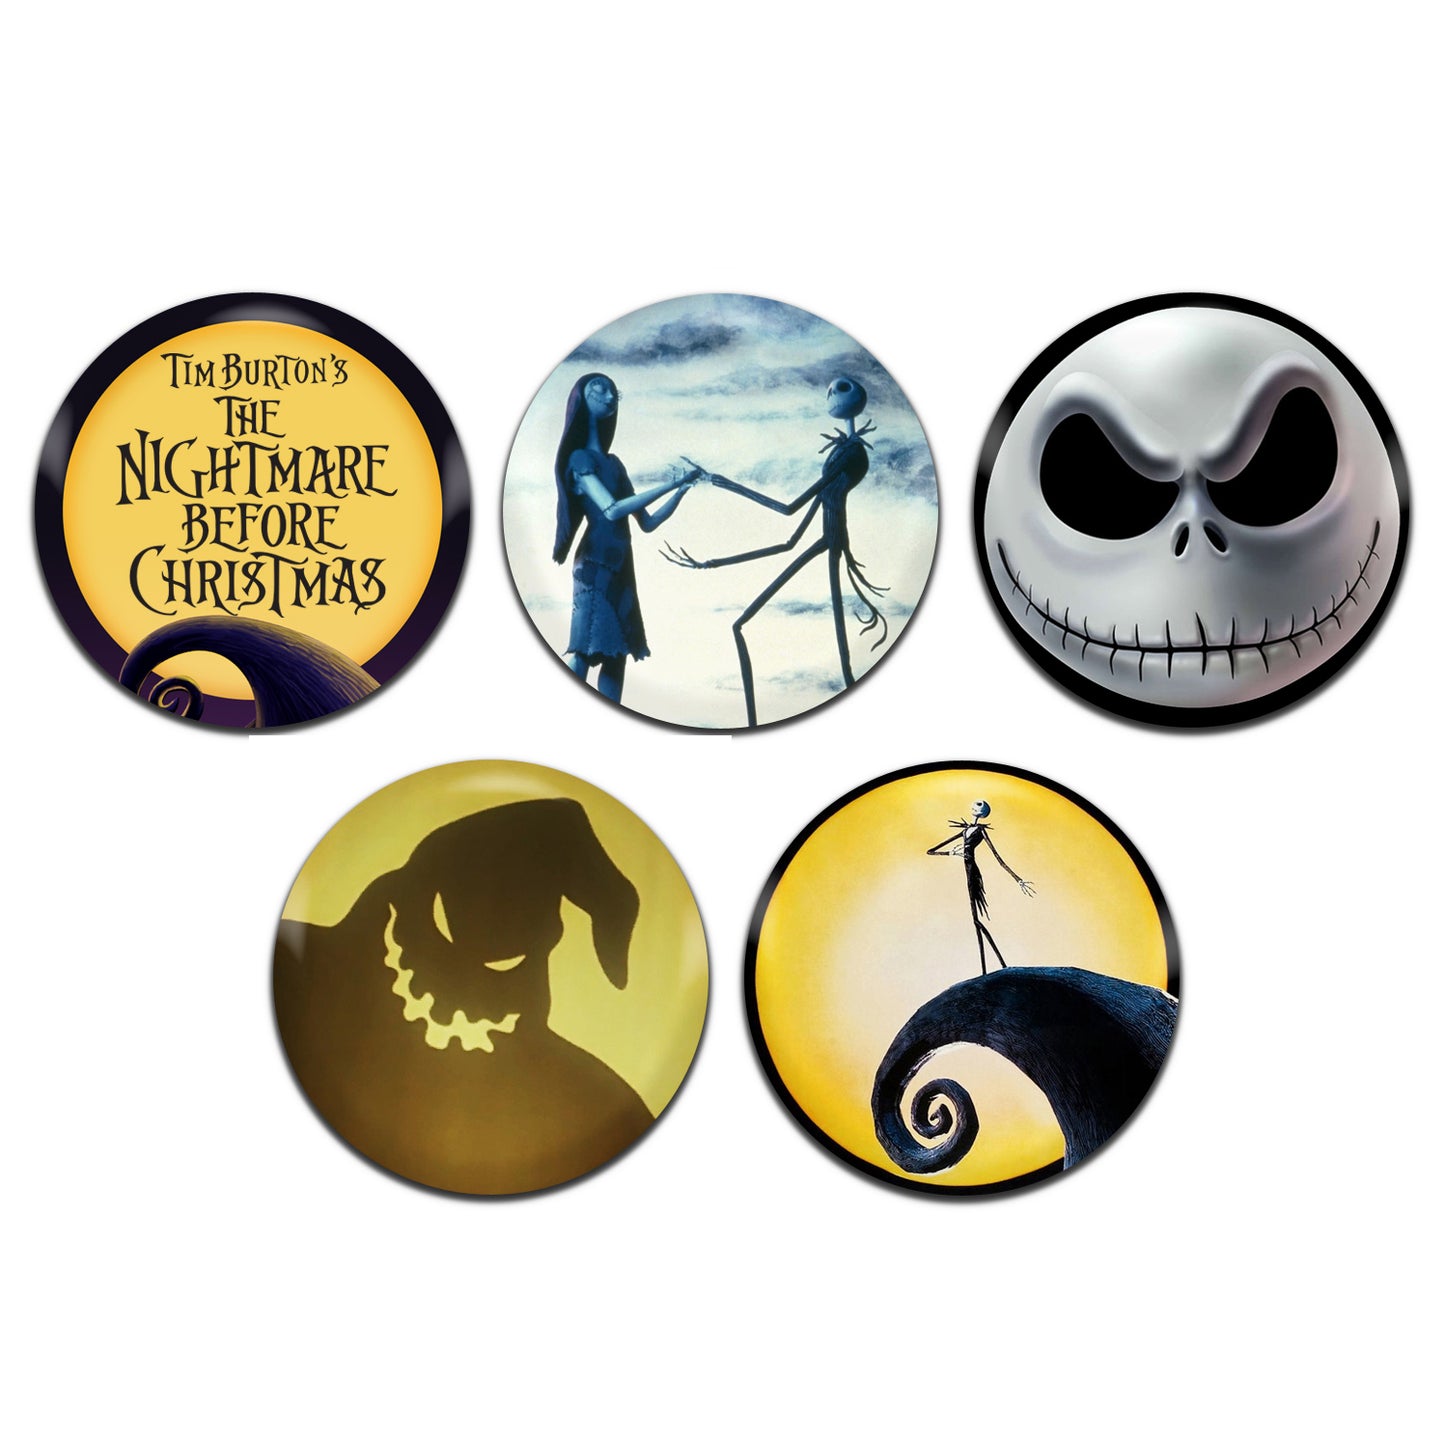 The Nightmare Before Christmas Movie Musical Film 25mm / 1 Inch D-Pin Button Badges (5x Set)